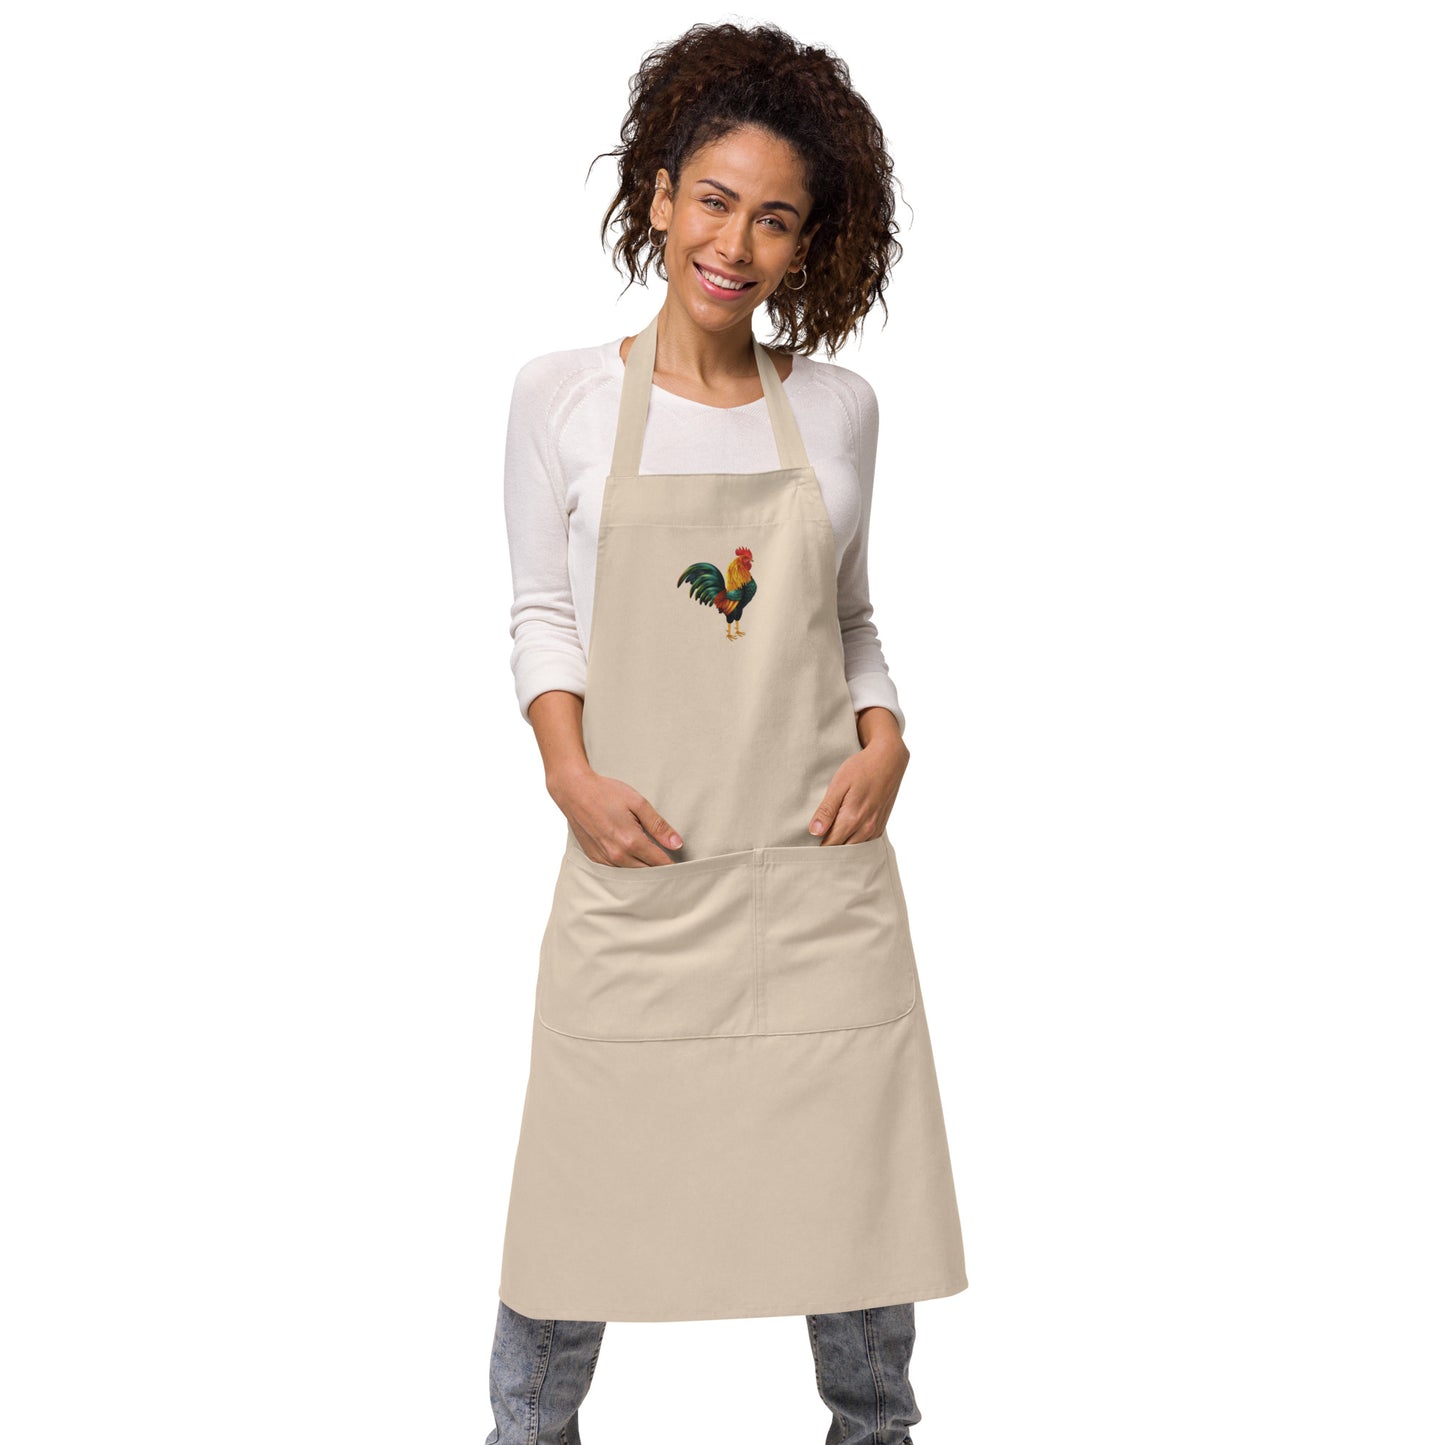 Organic cotton apron embroidered with a cockerel